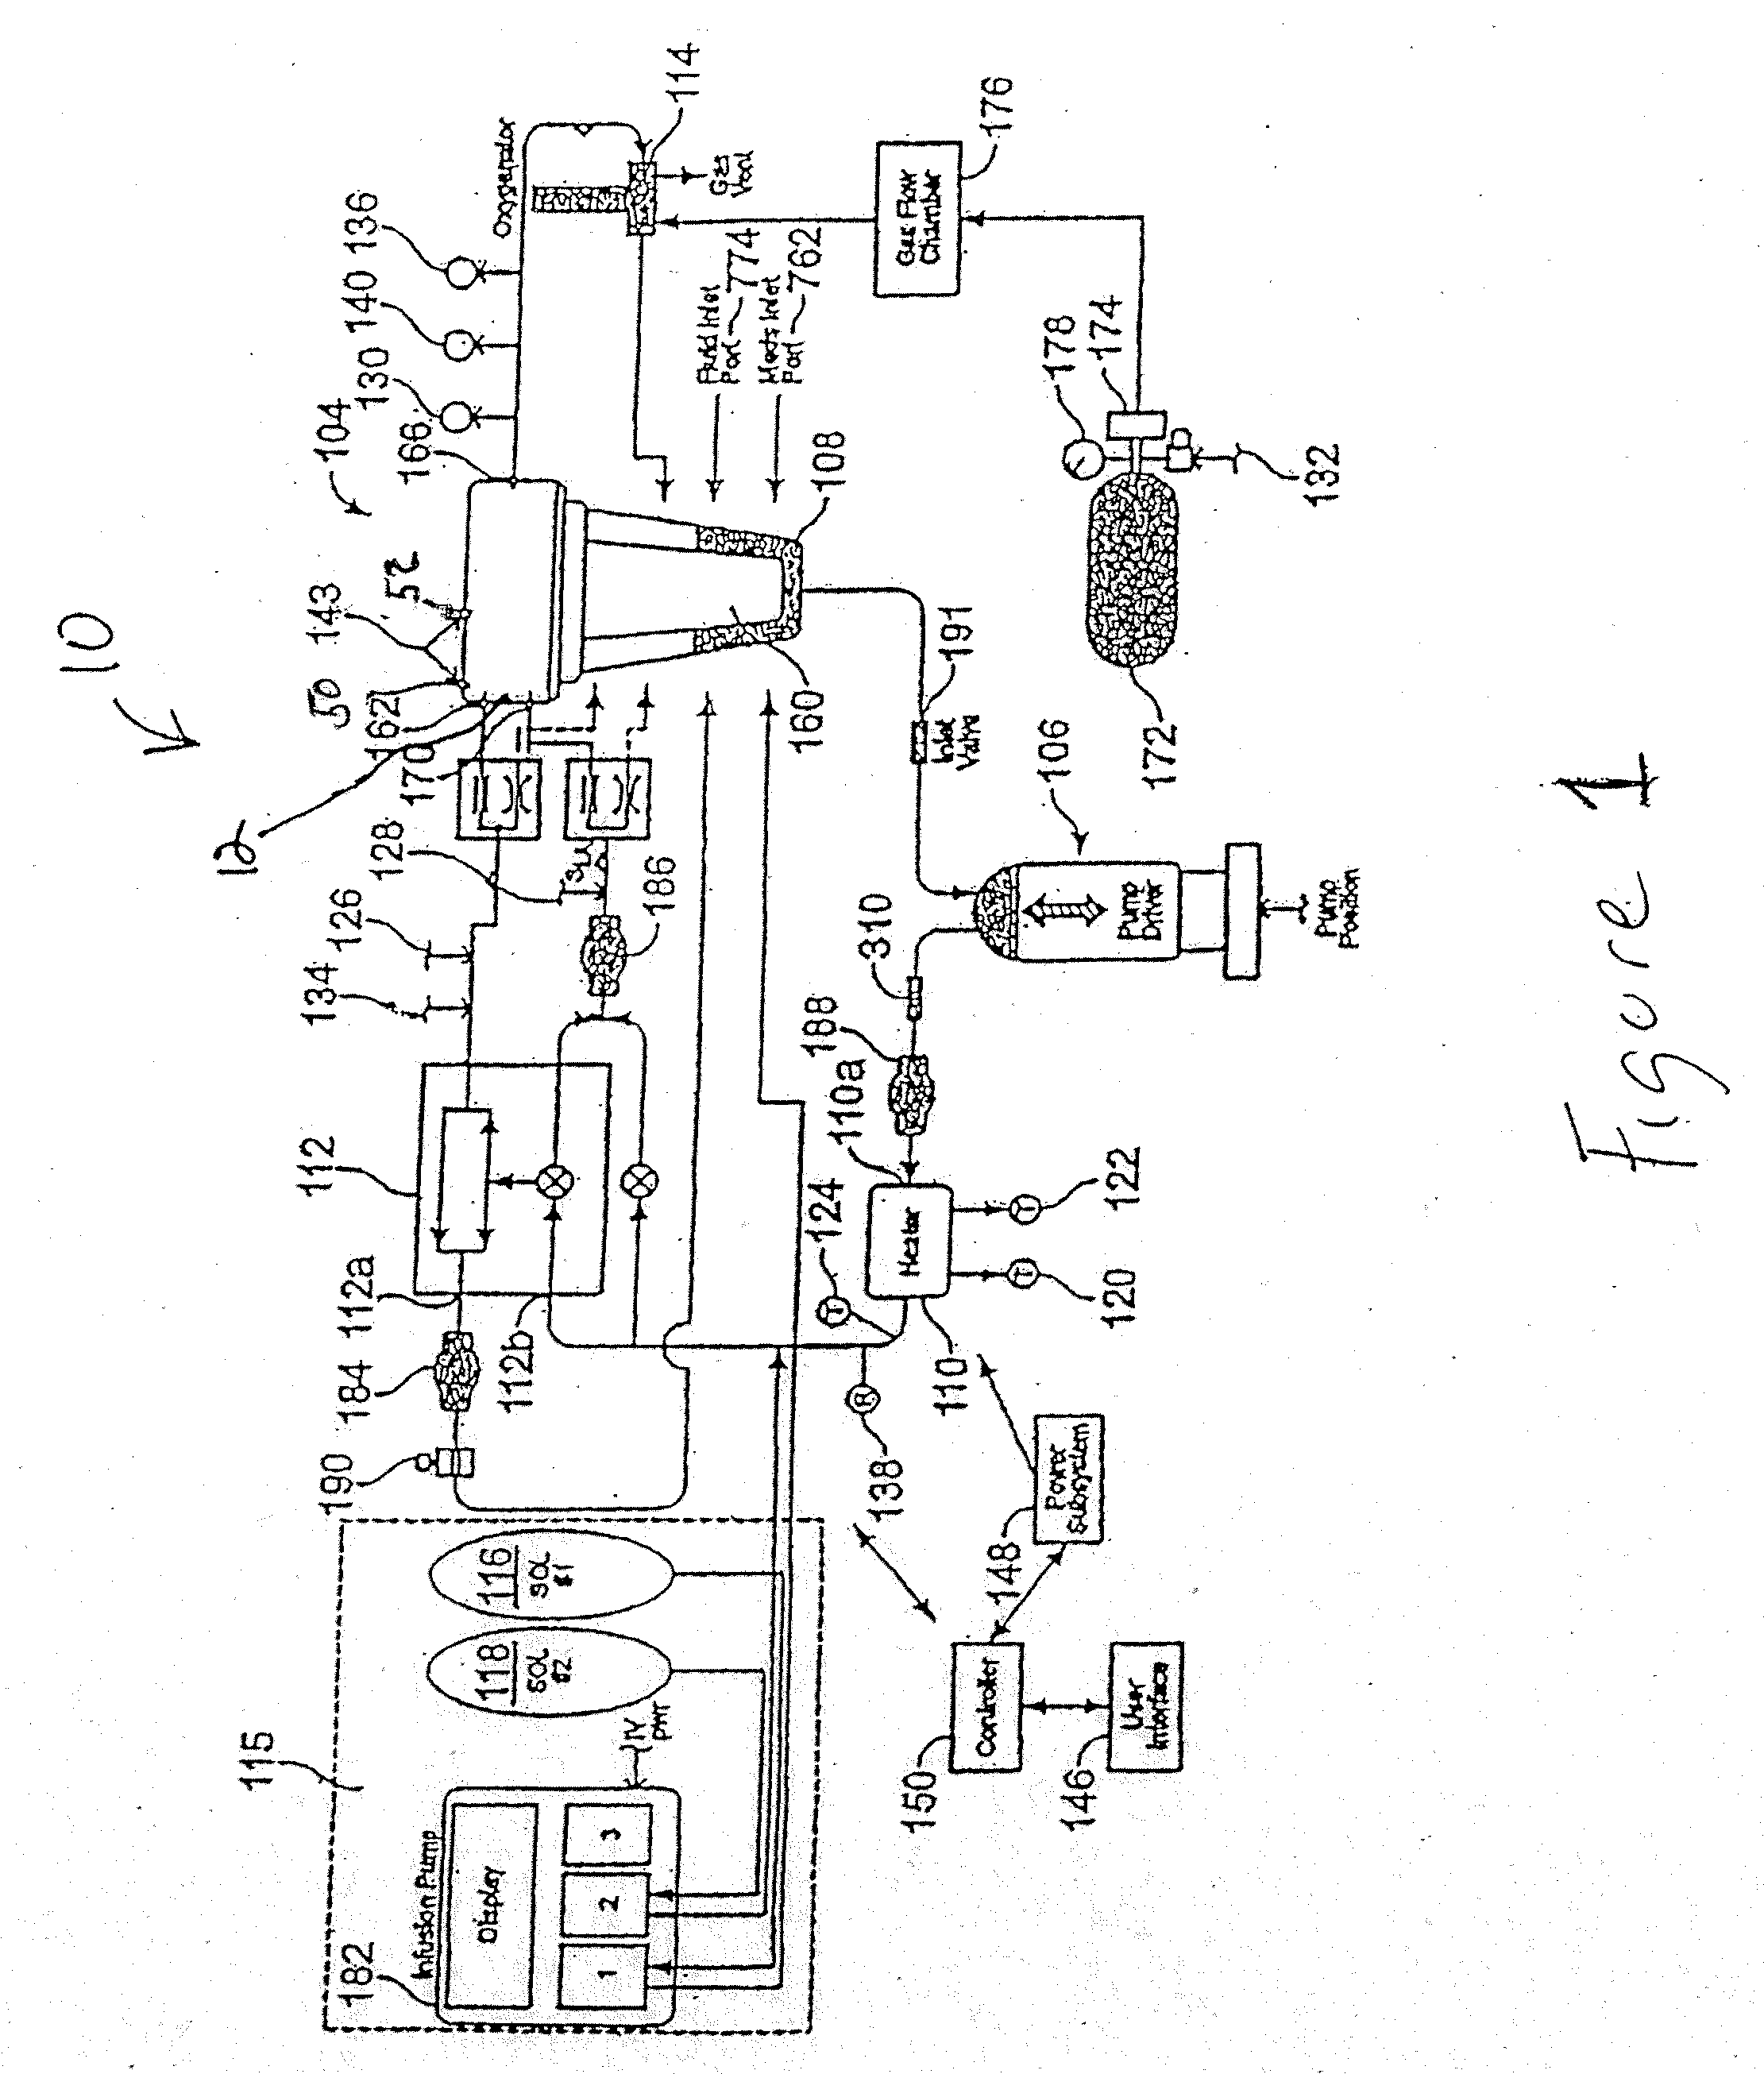 Systems for monitoring and applying electrical currents in an organ perfusion system